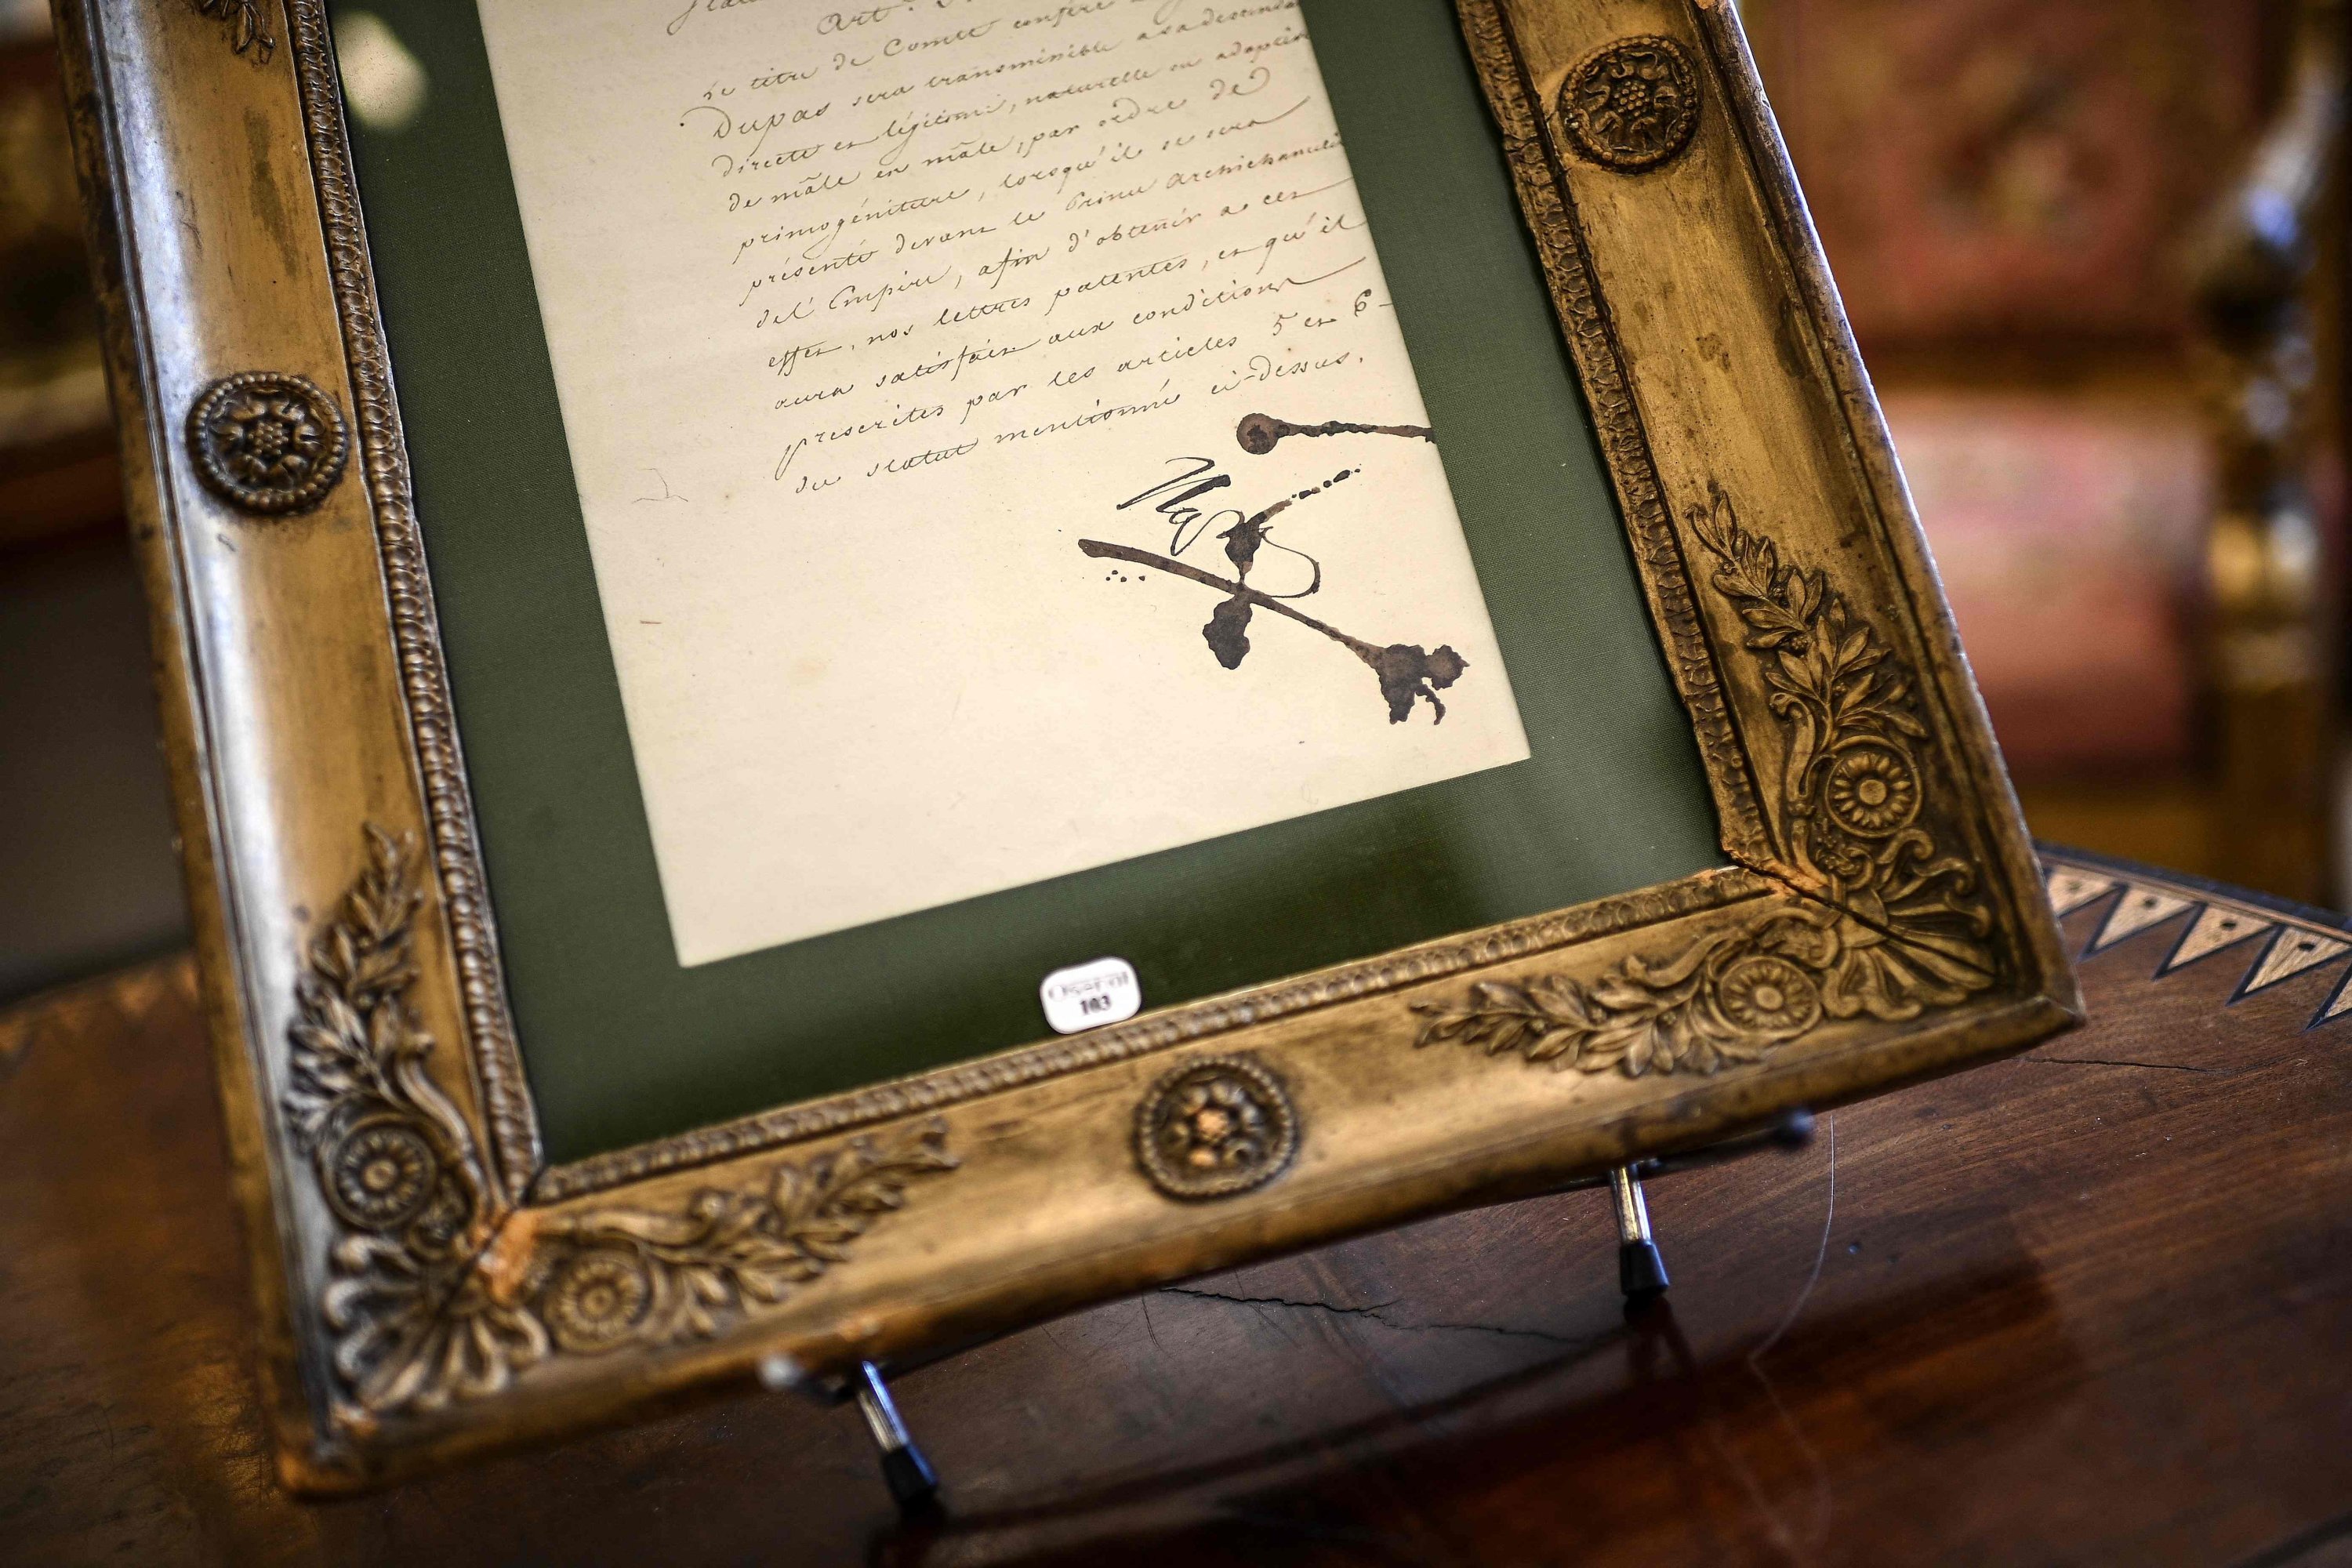 Napoleon's belongings go on auction for 200th death anniversary